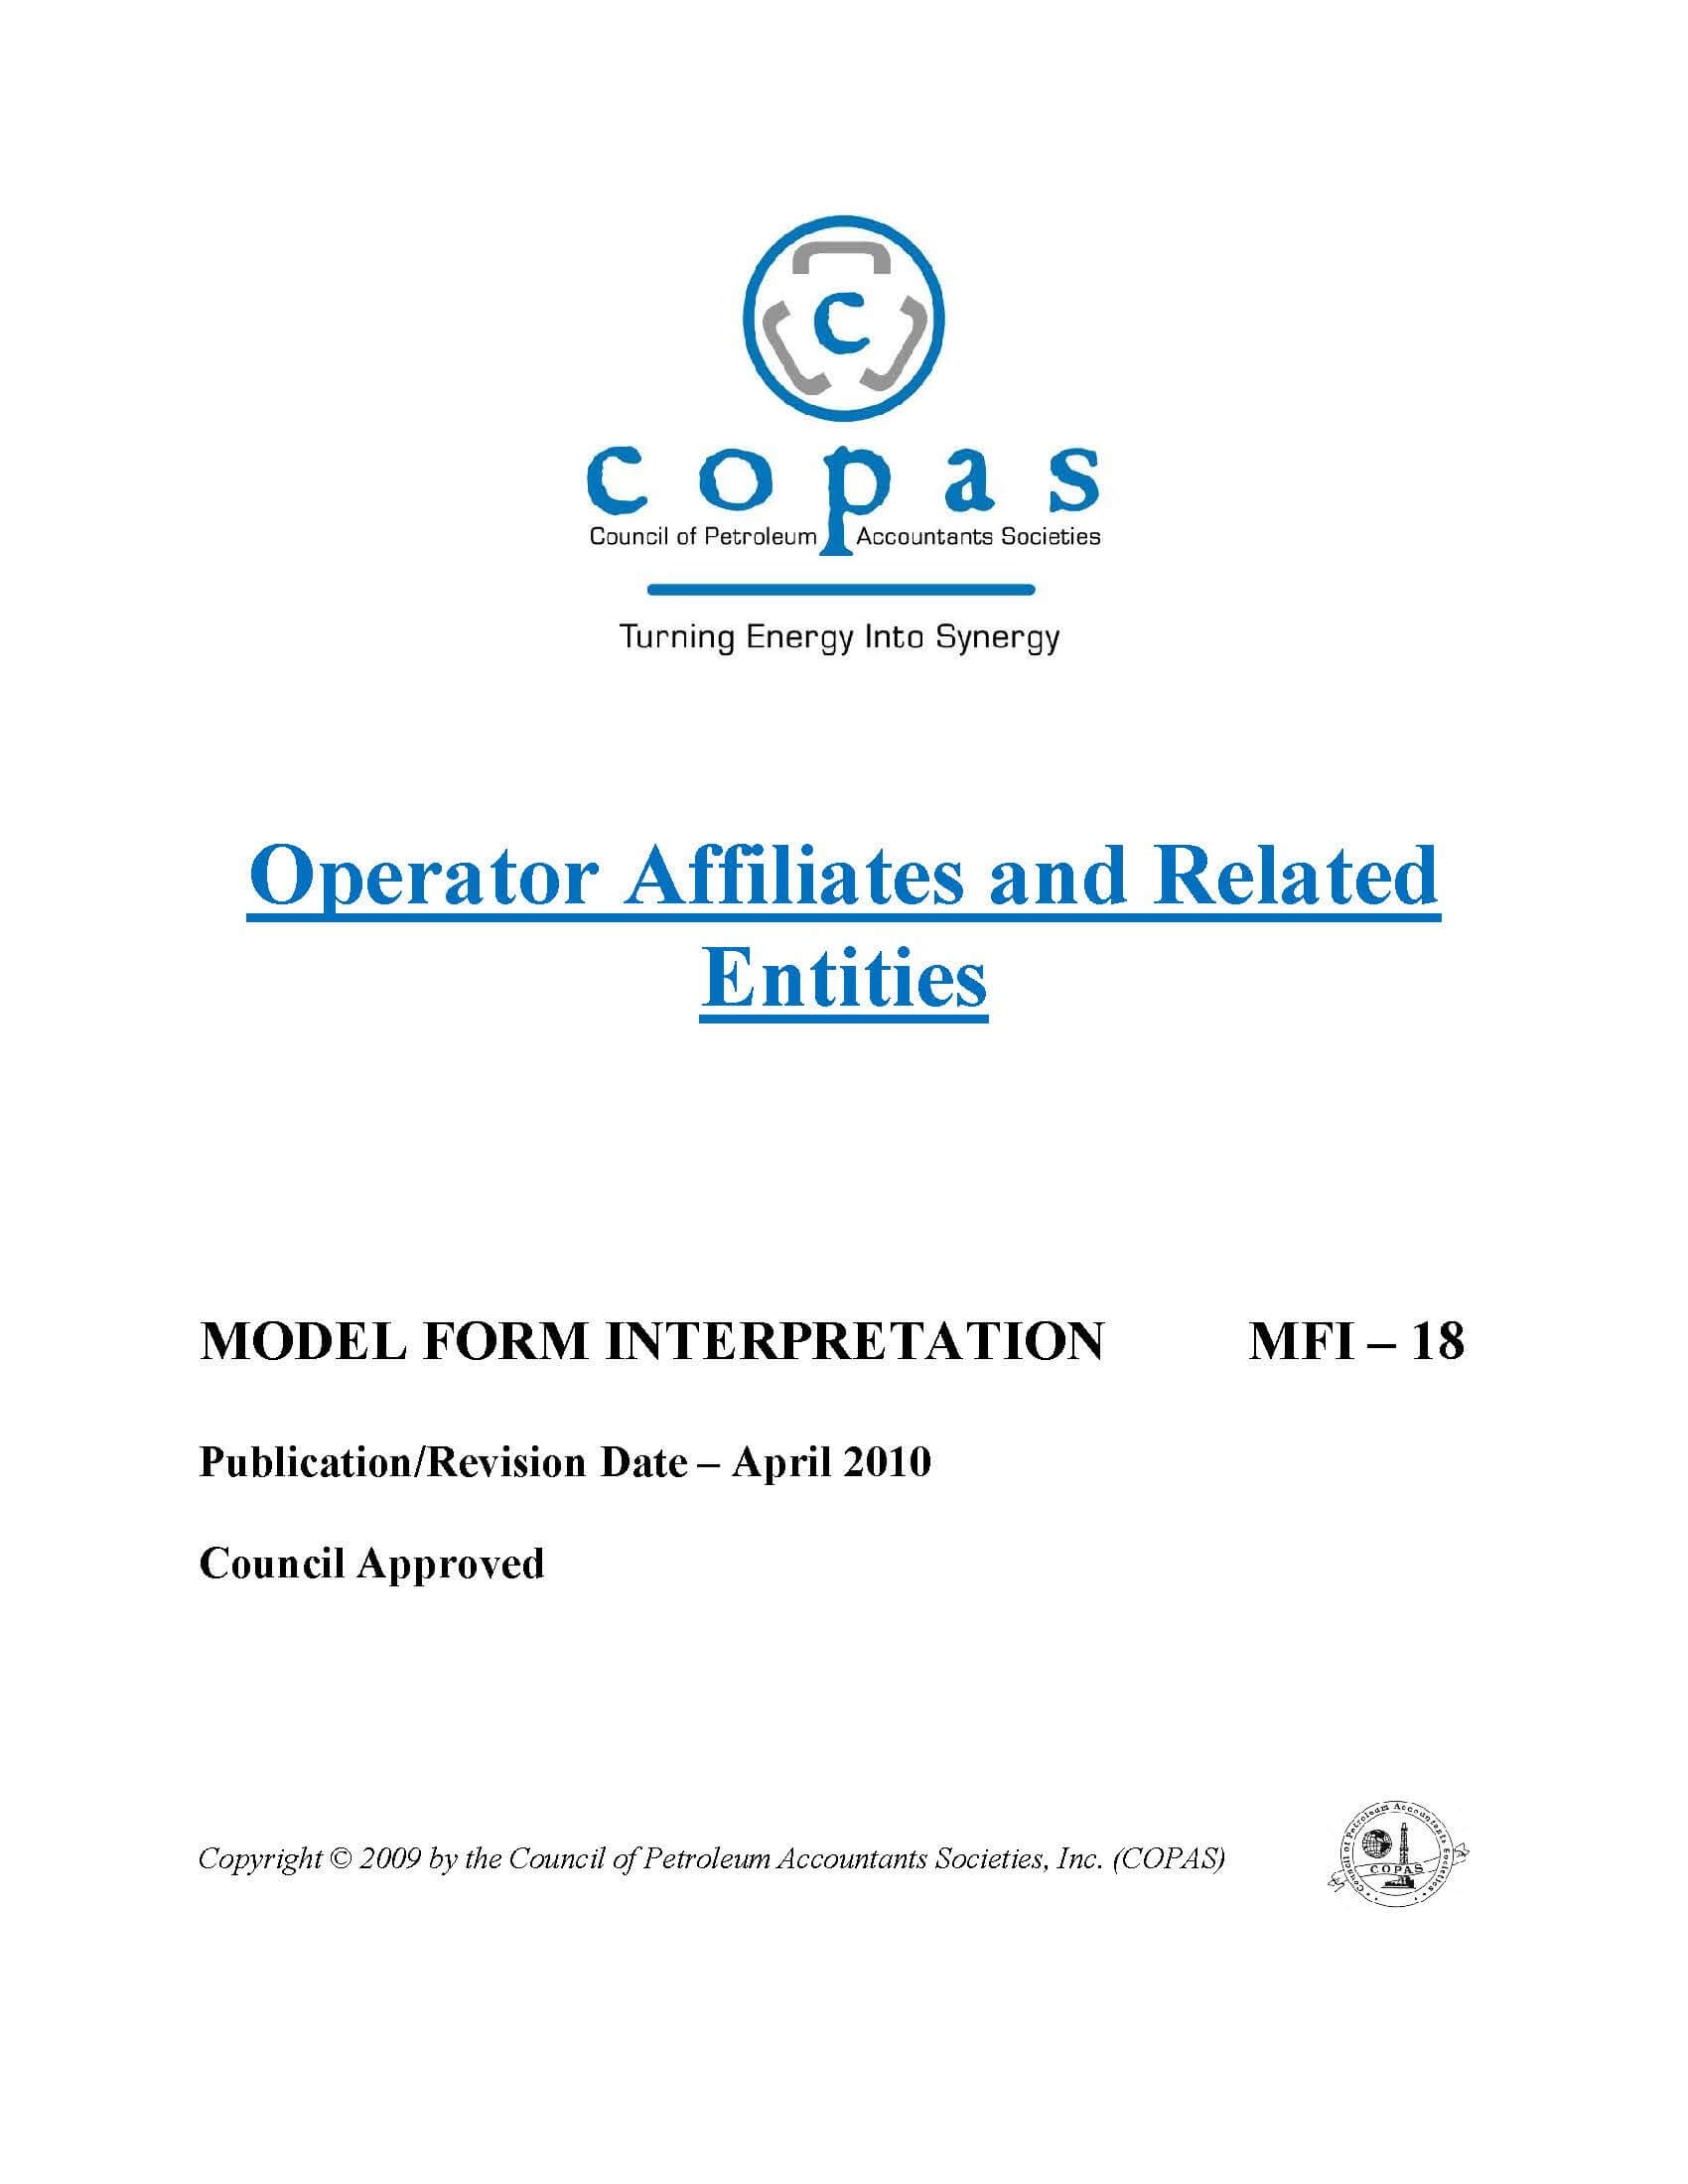 MFI-18 Operator Affiliates and Related Entities